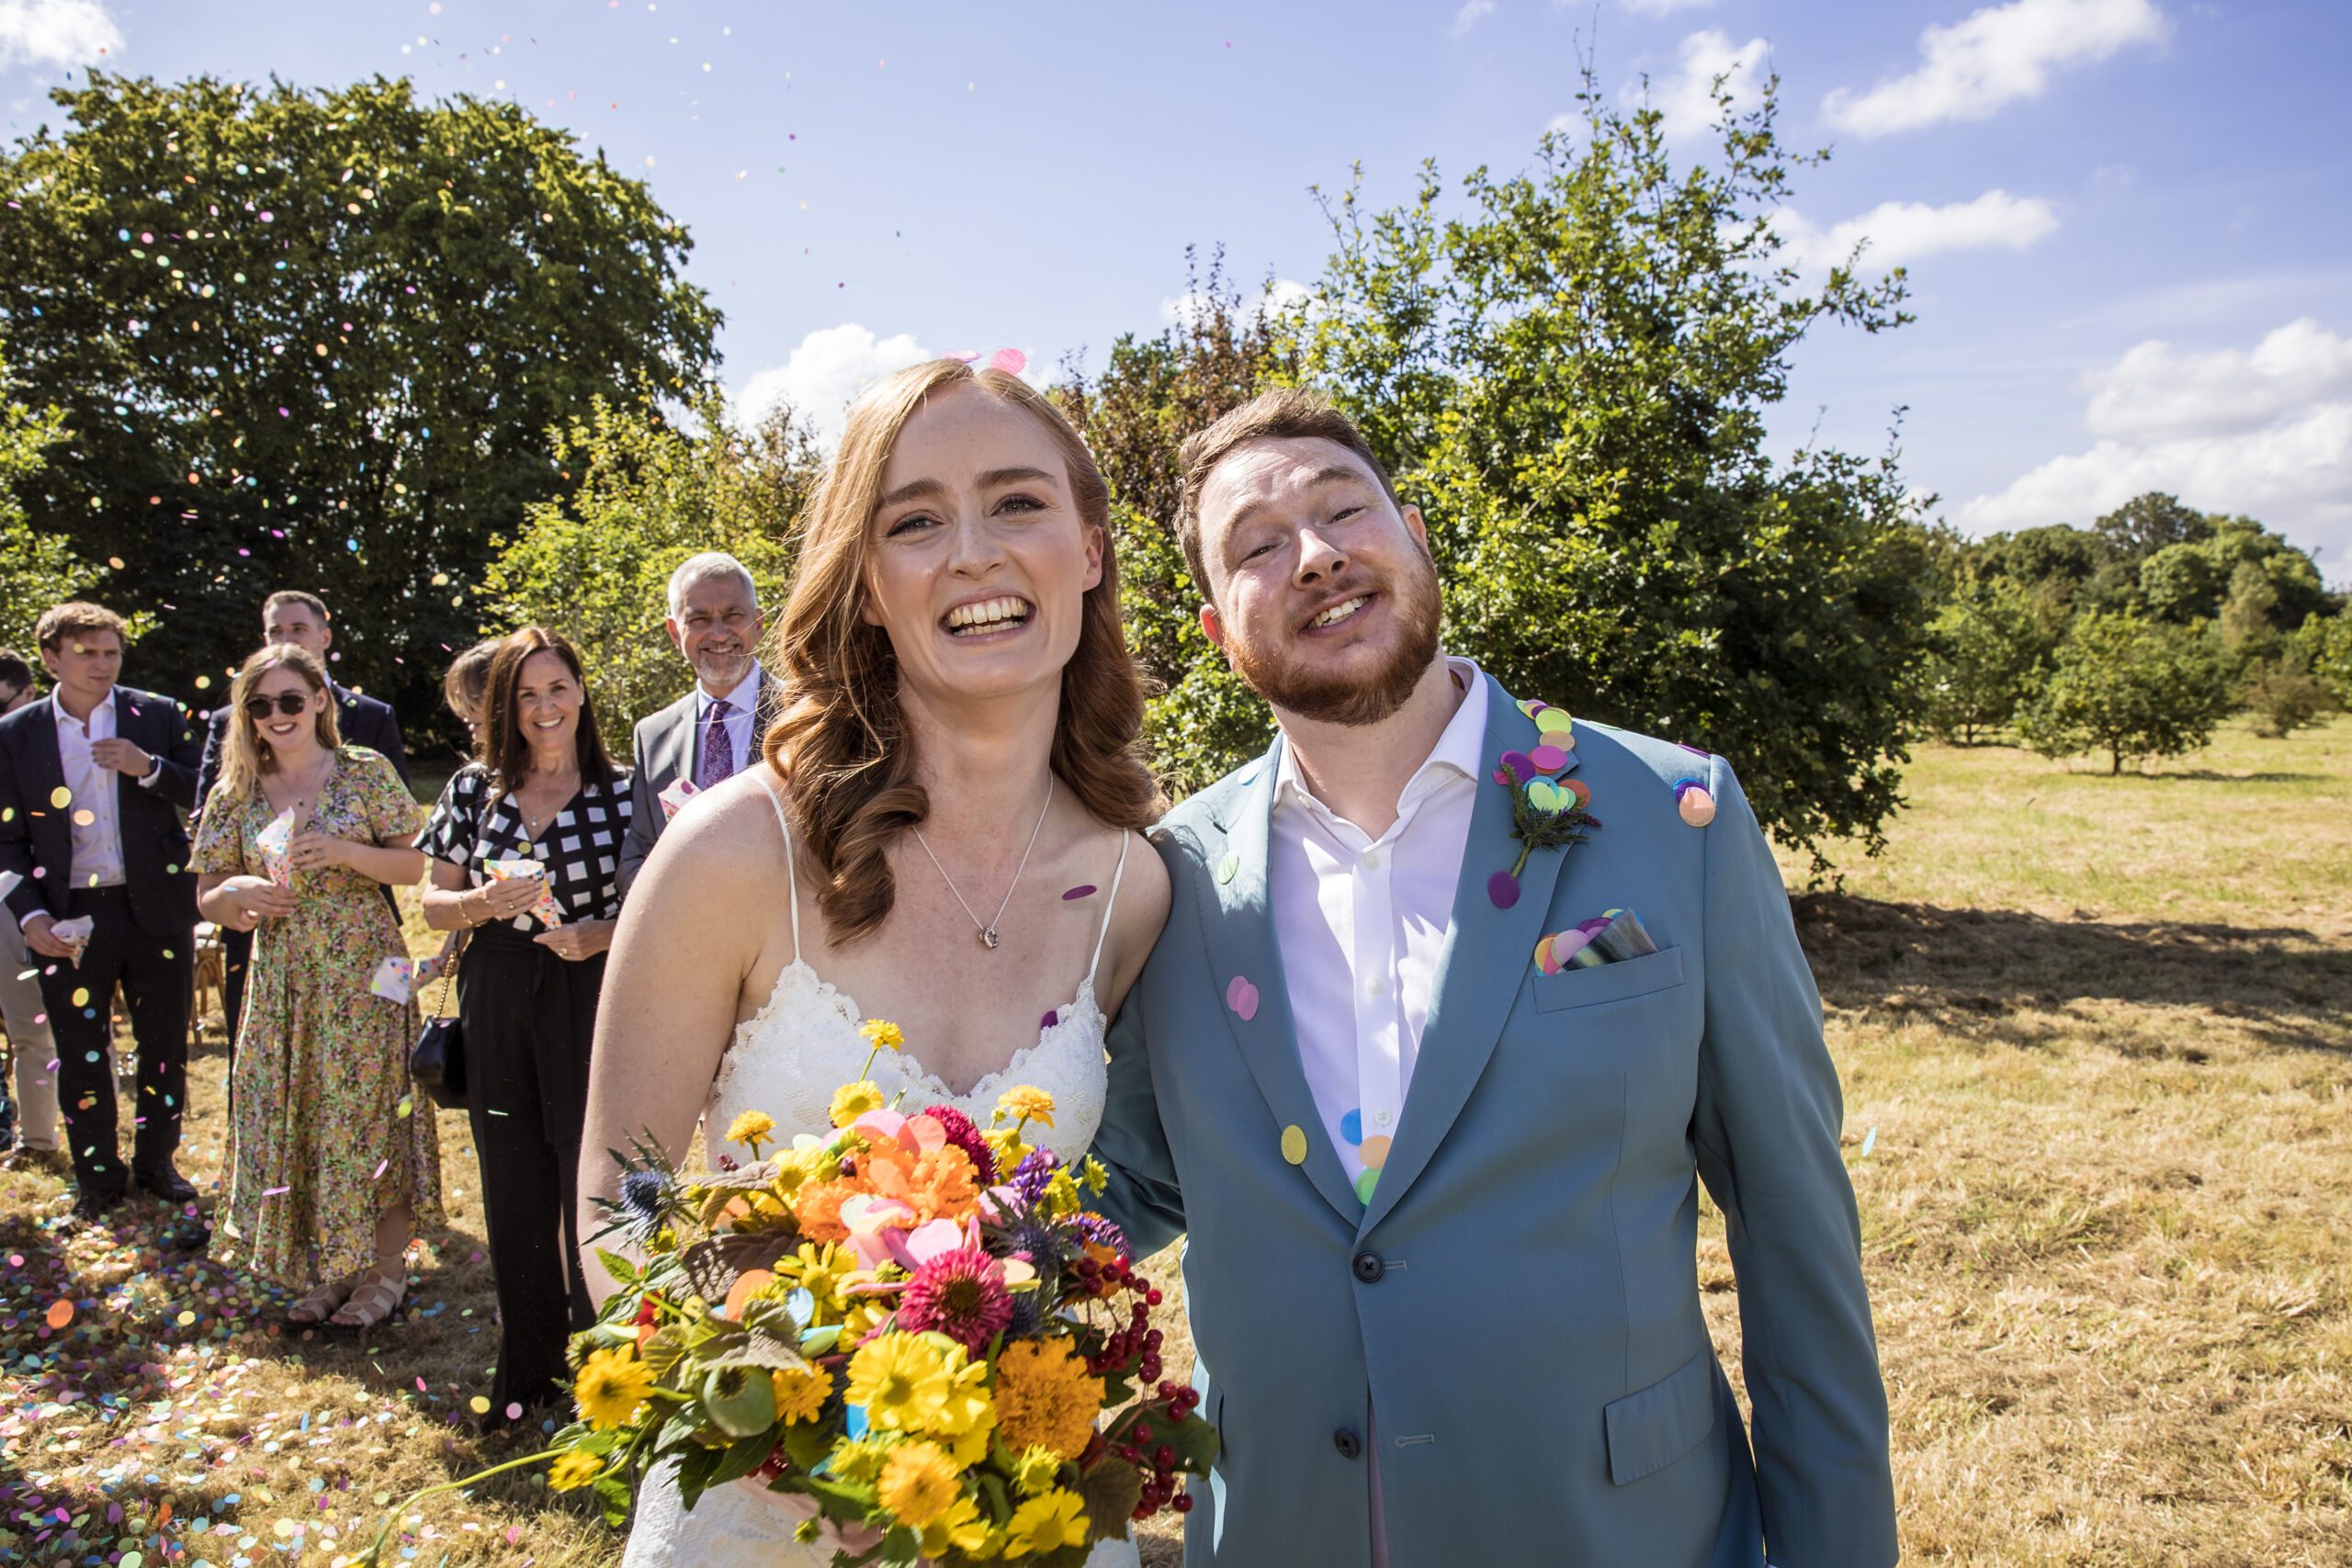 new husband and wife at their garden wedding